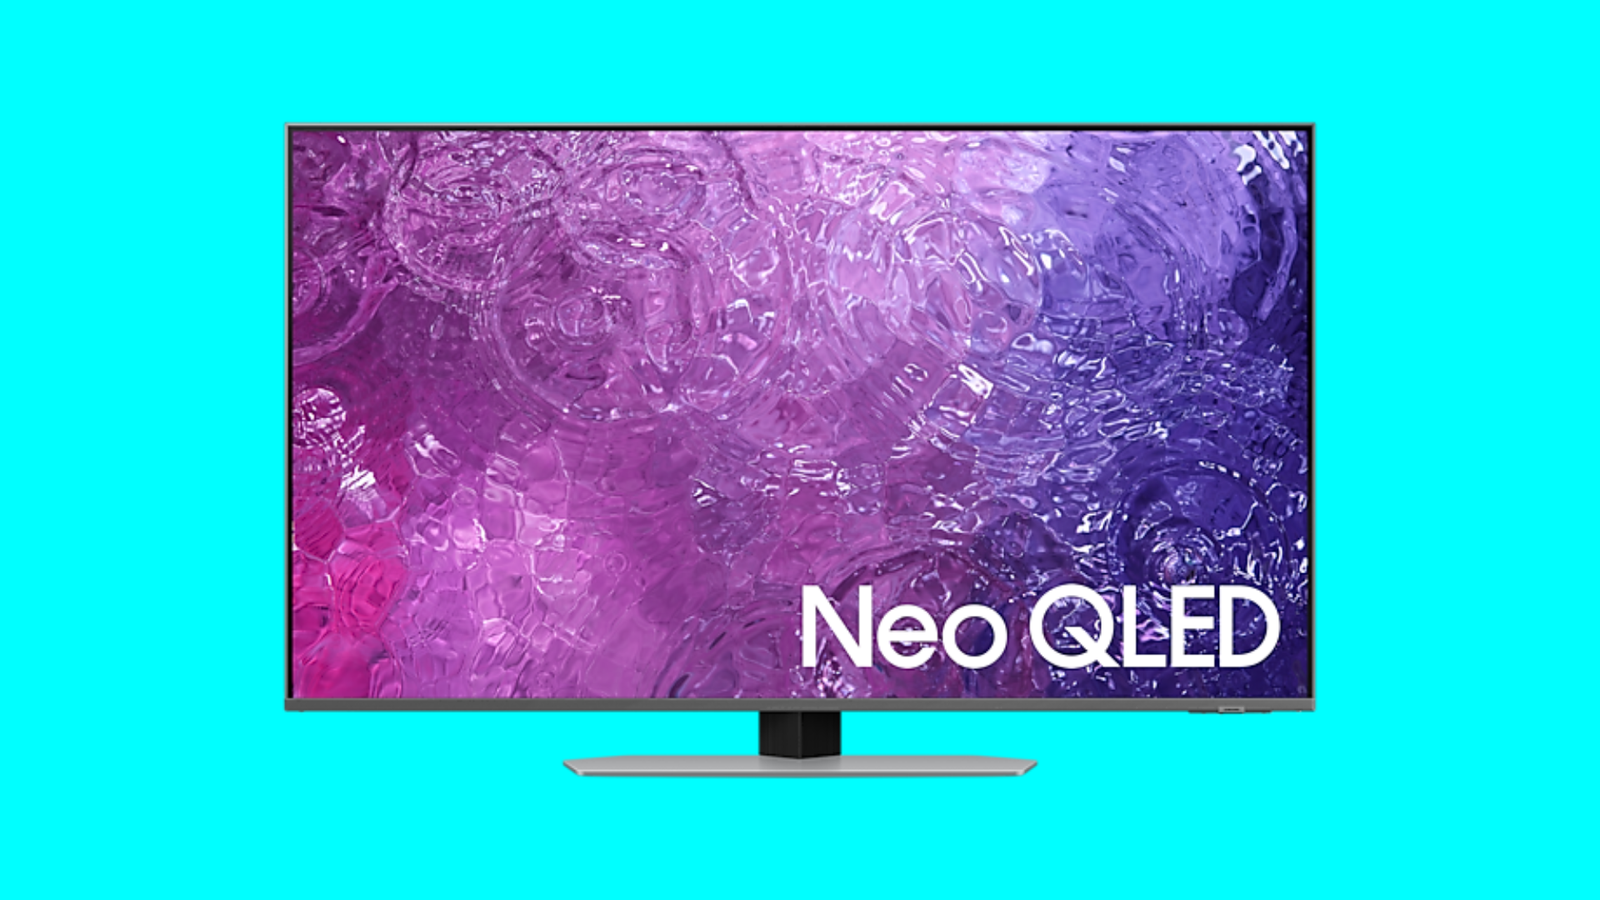 An image of the Samsung QN90C QLED TV